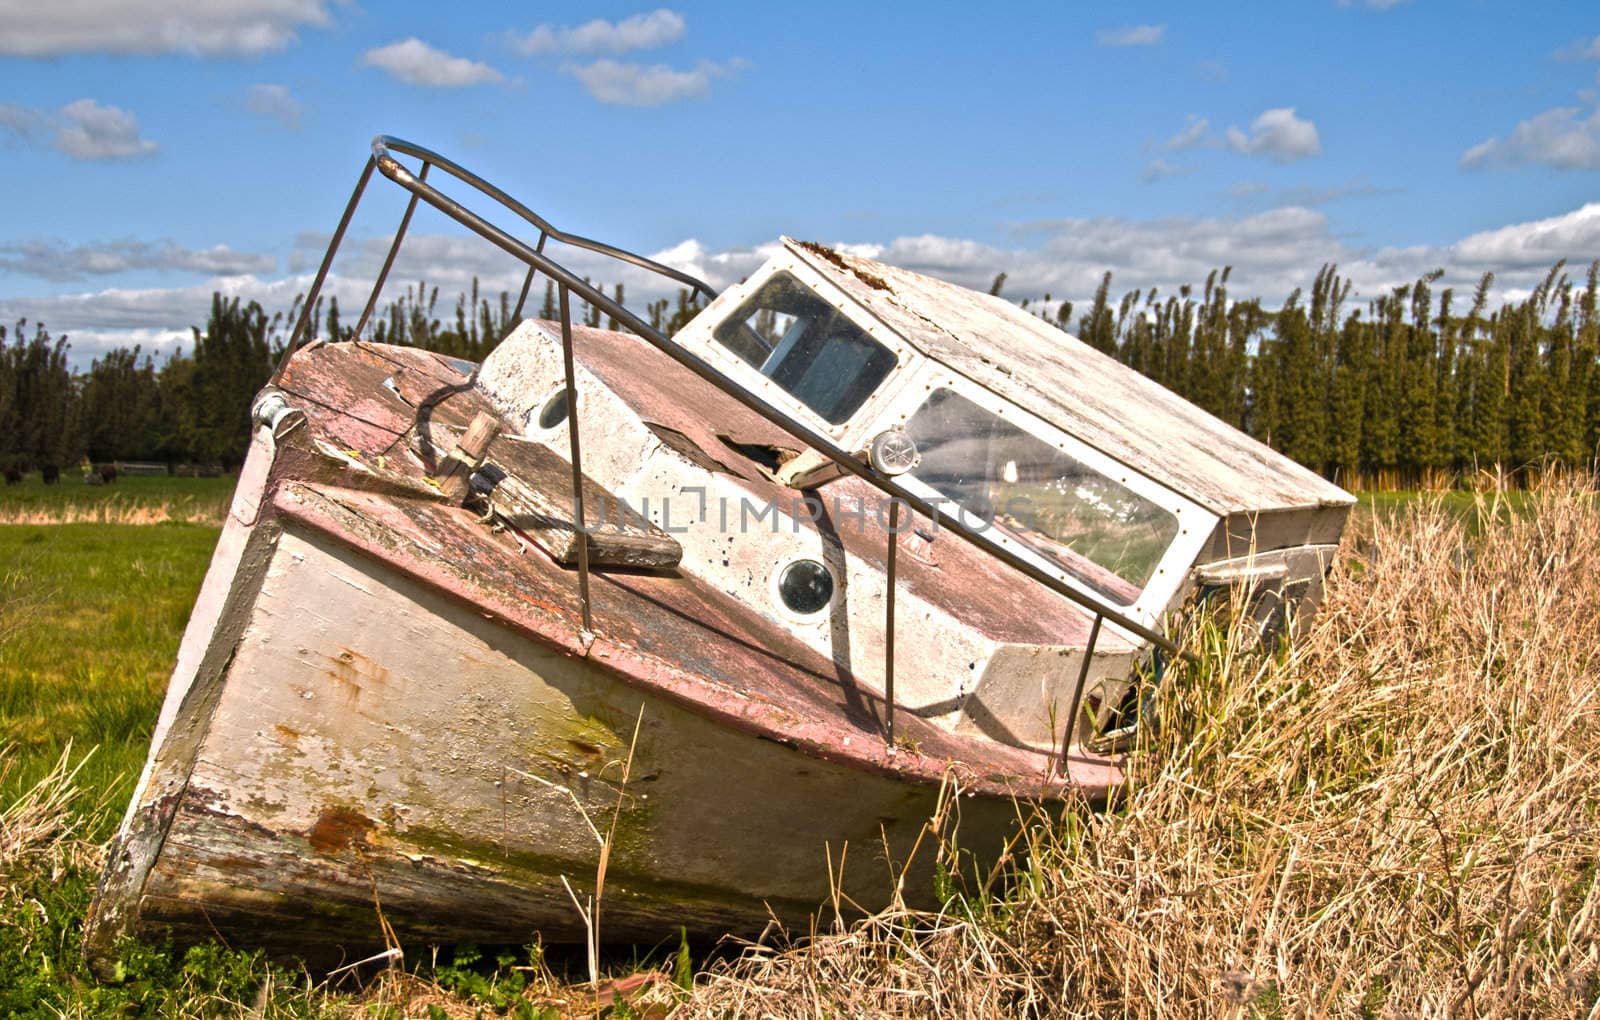 Abandoned Boat in the New Zealand countryside.